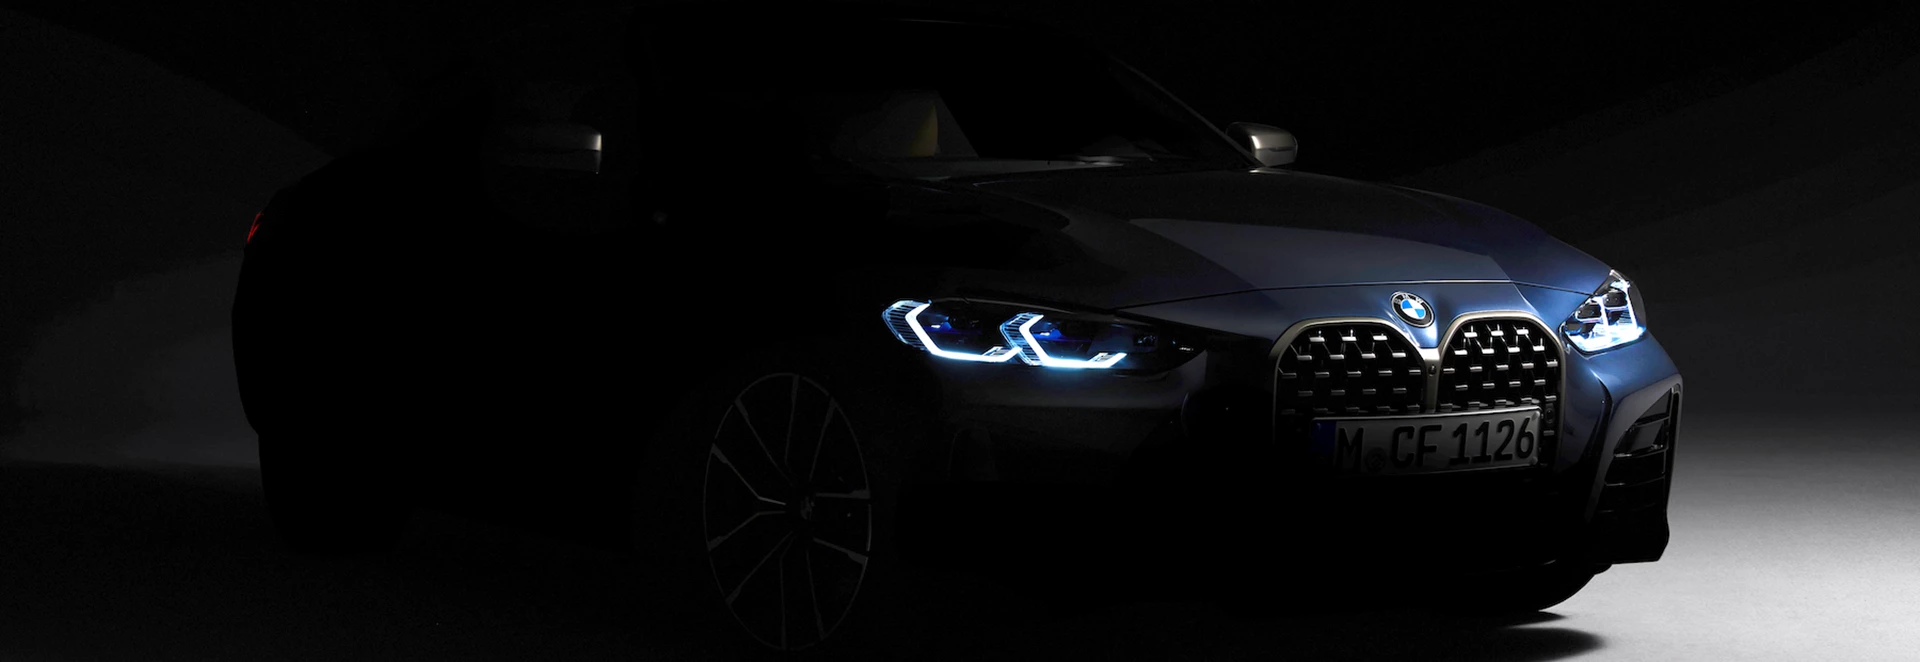 BMW teases new 4 Series Coupe ahead of full unveiling next week 